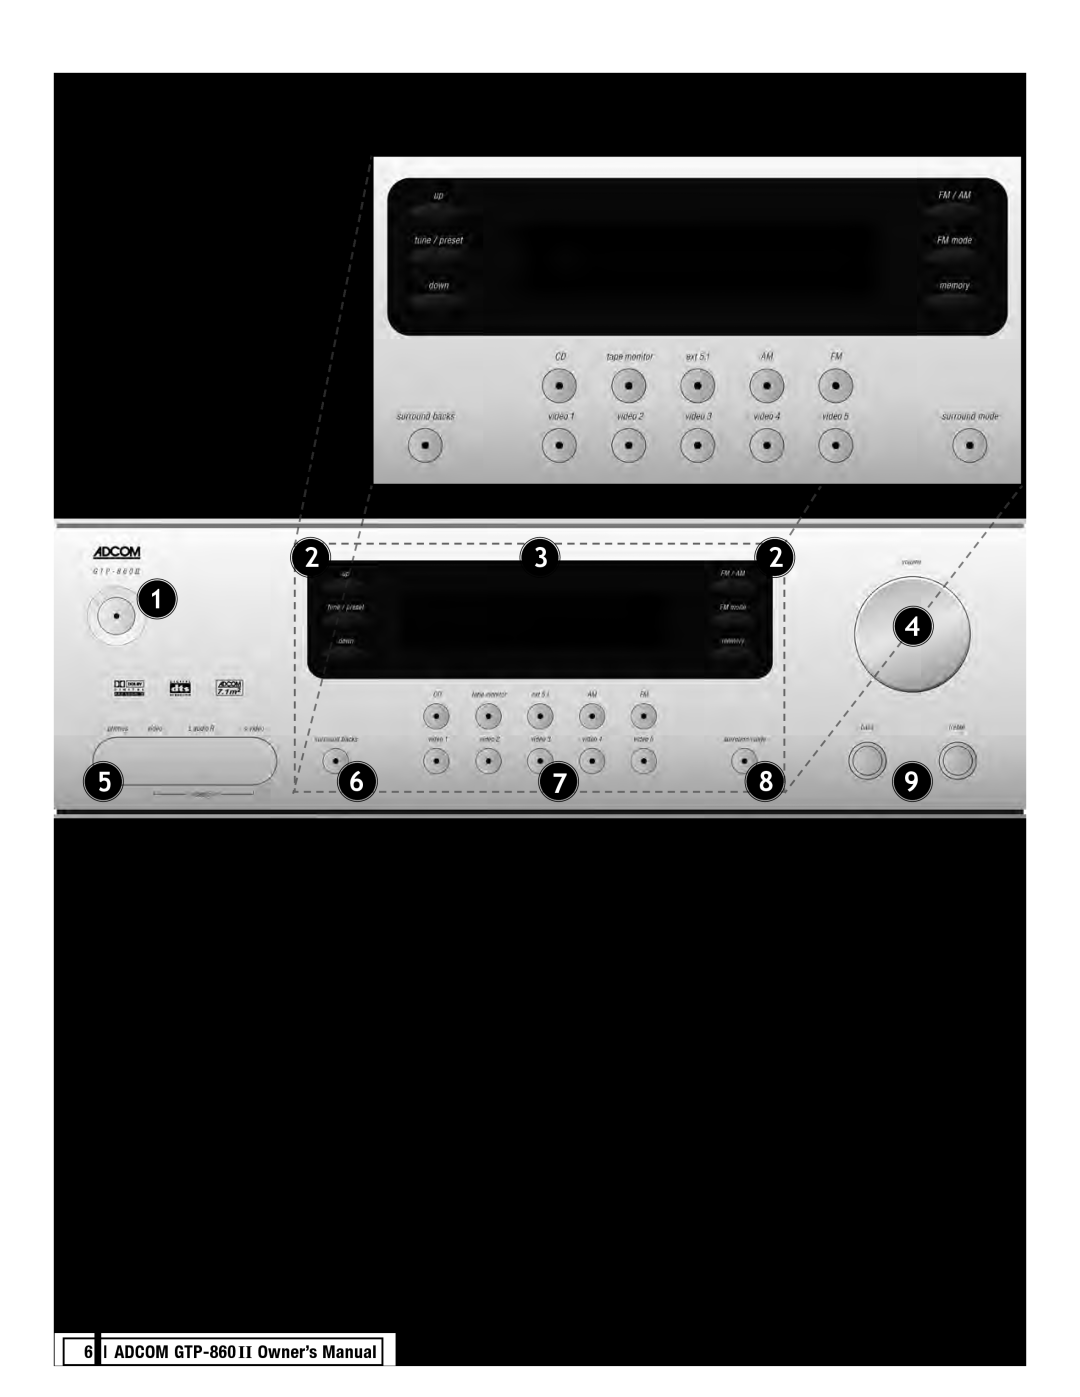 Adcom manual GTP-860IIFront Panel, 1.1Interface Overview, 1.0Description of Unit, Volume Knob 5 Headphone/Vid 5 In 